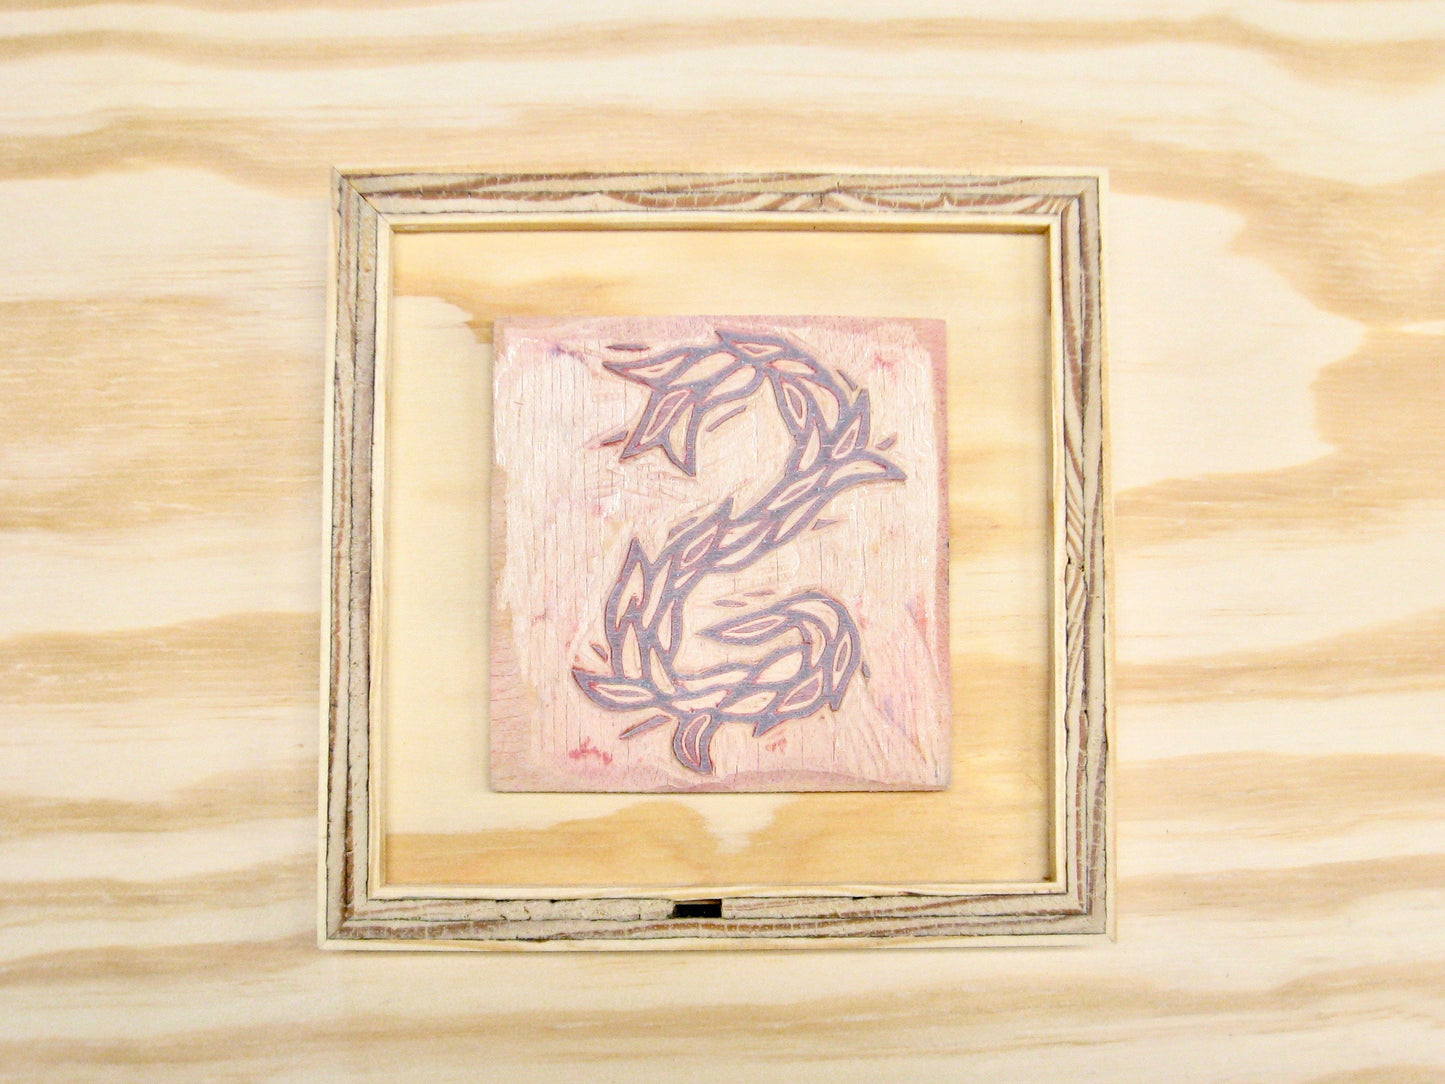 Letter S - hand carved original printers block with 6-pack monogram greeting cards - collector's item